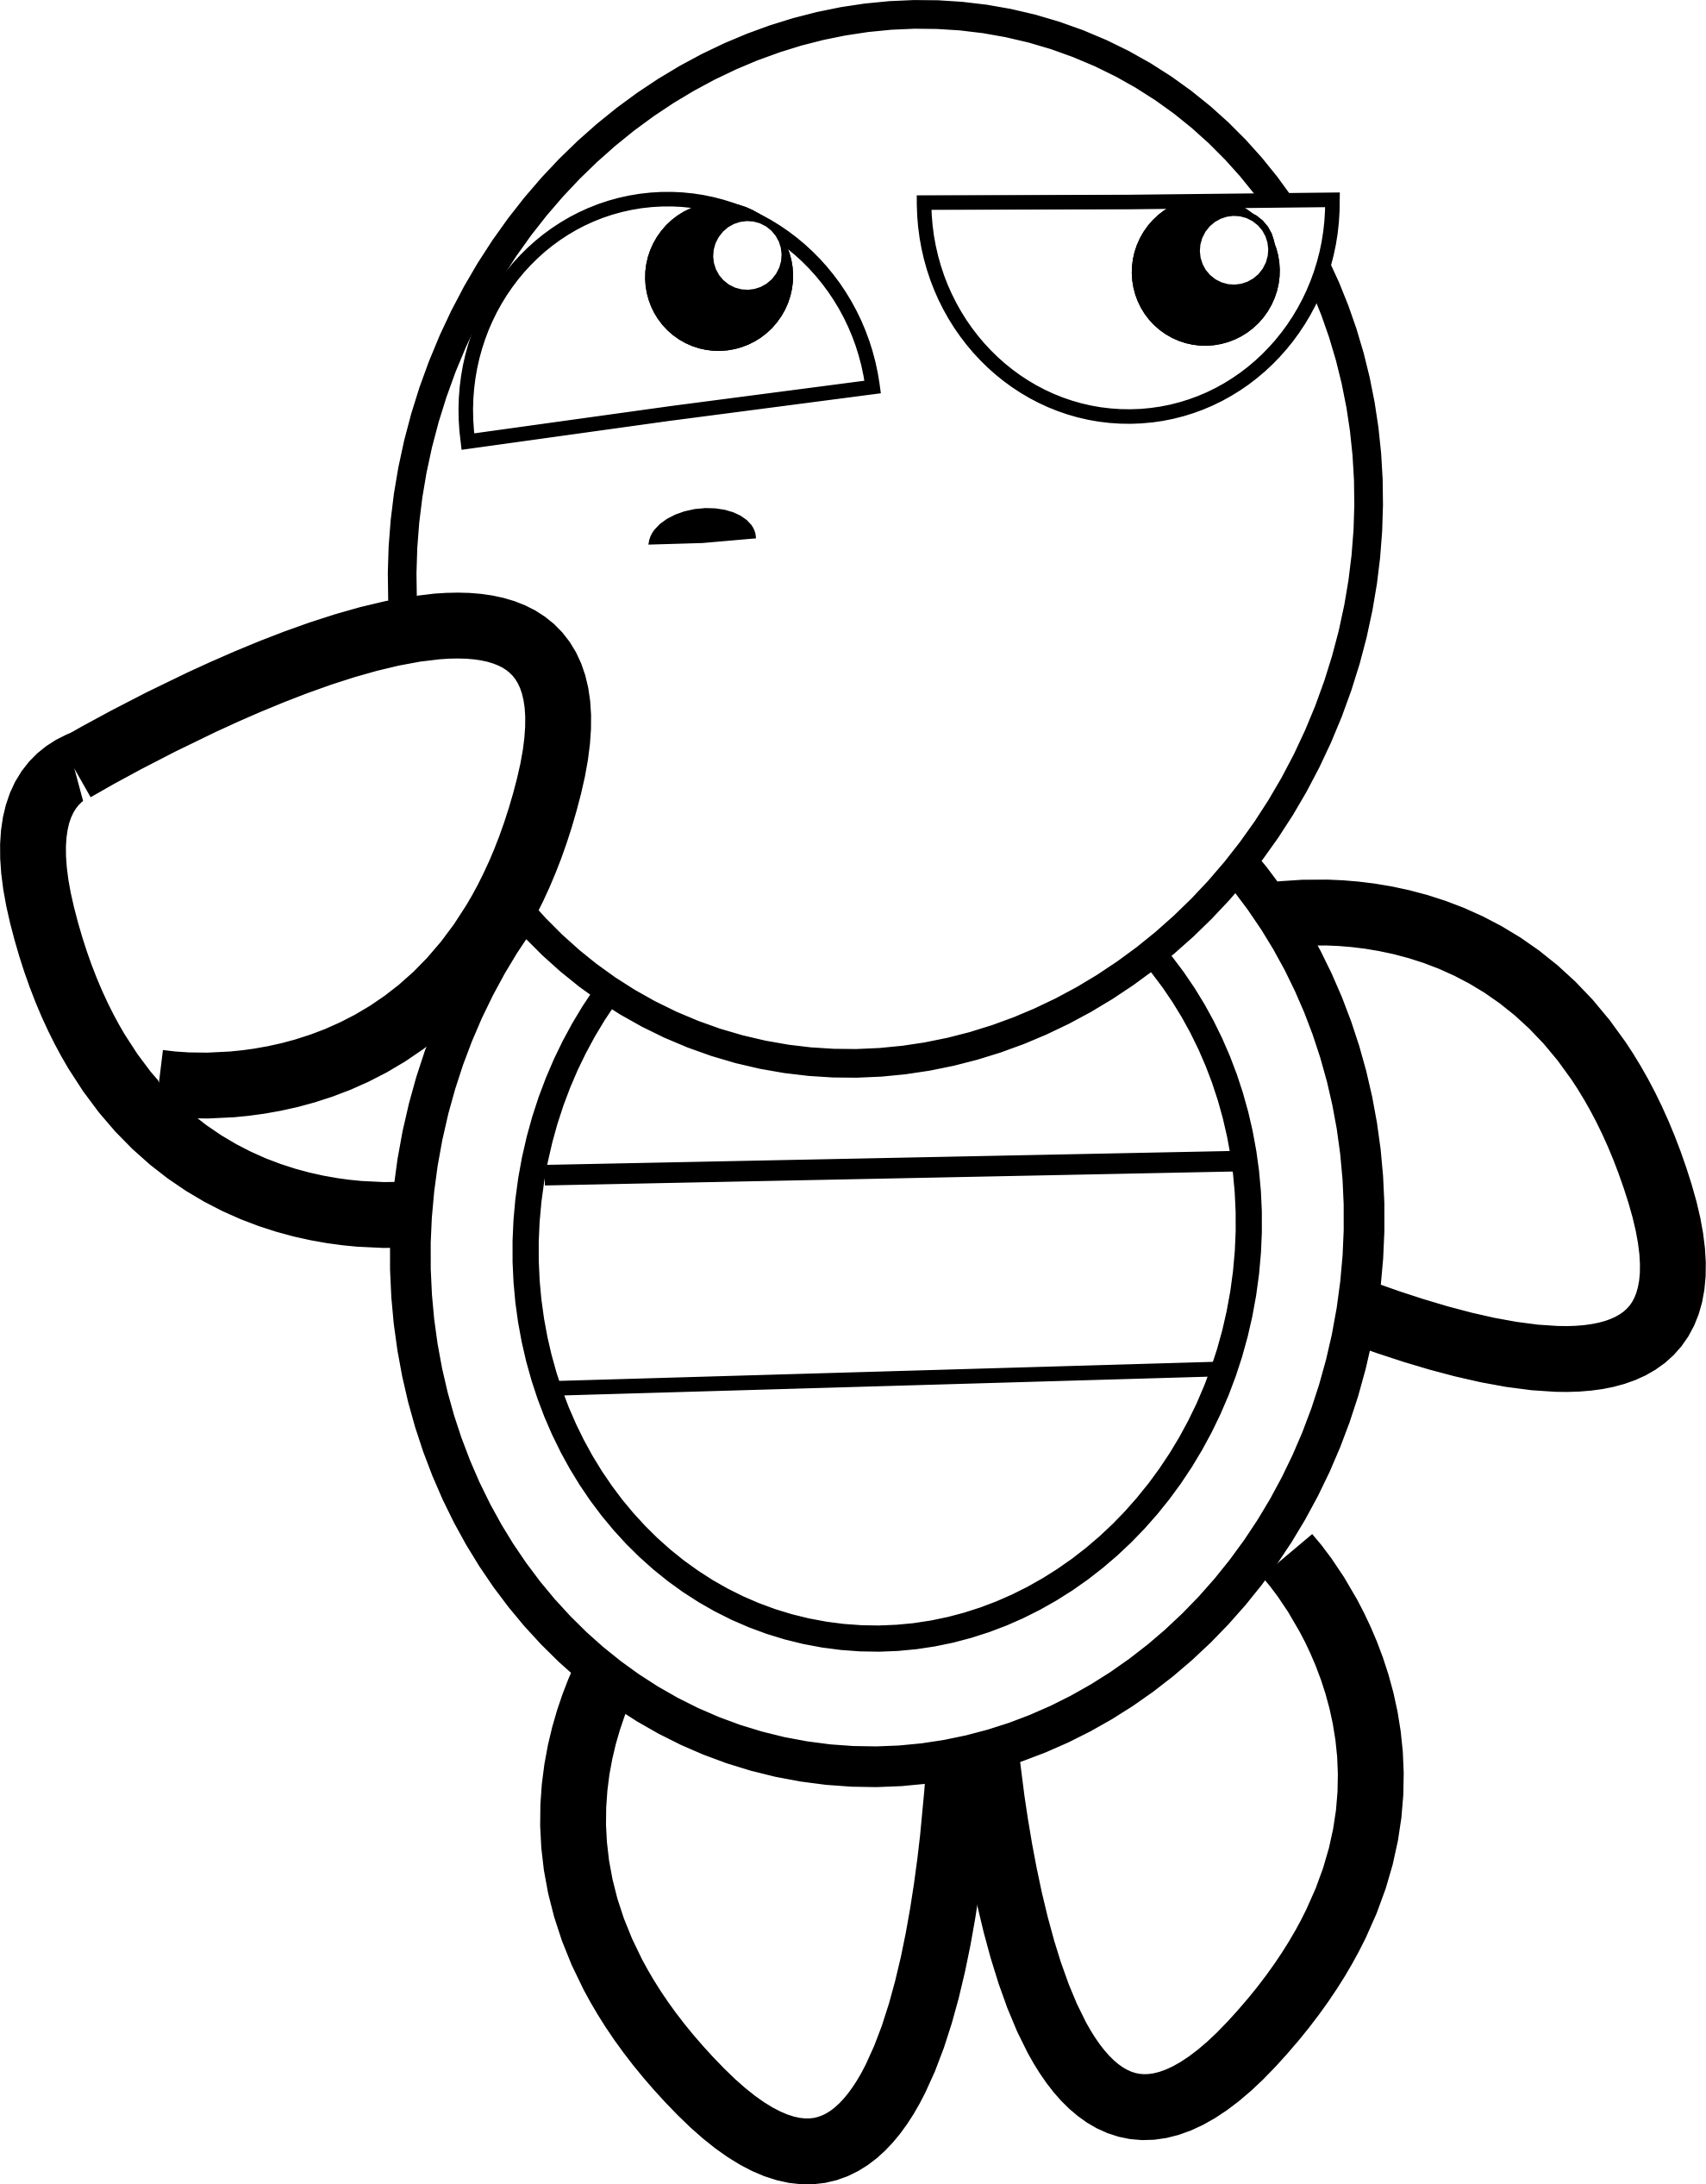 Cute turtles clipart black and white